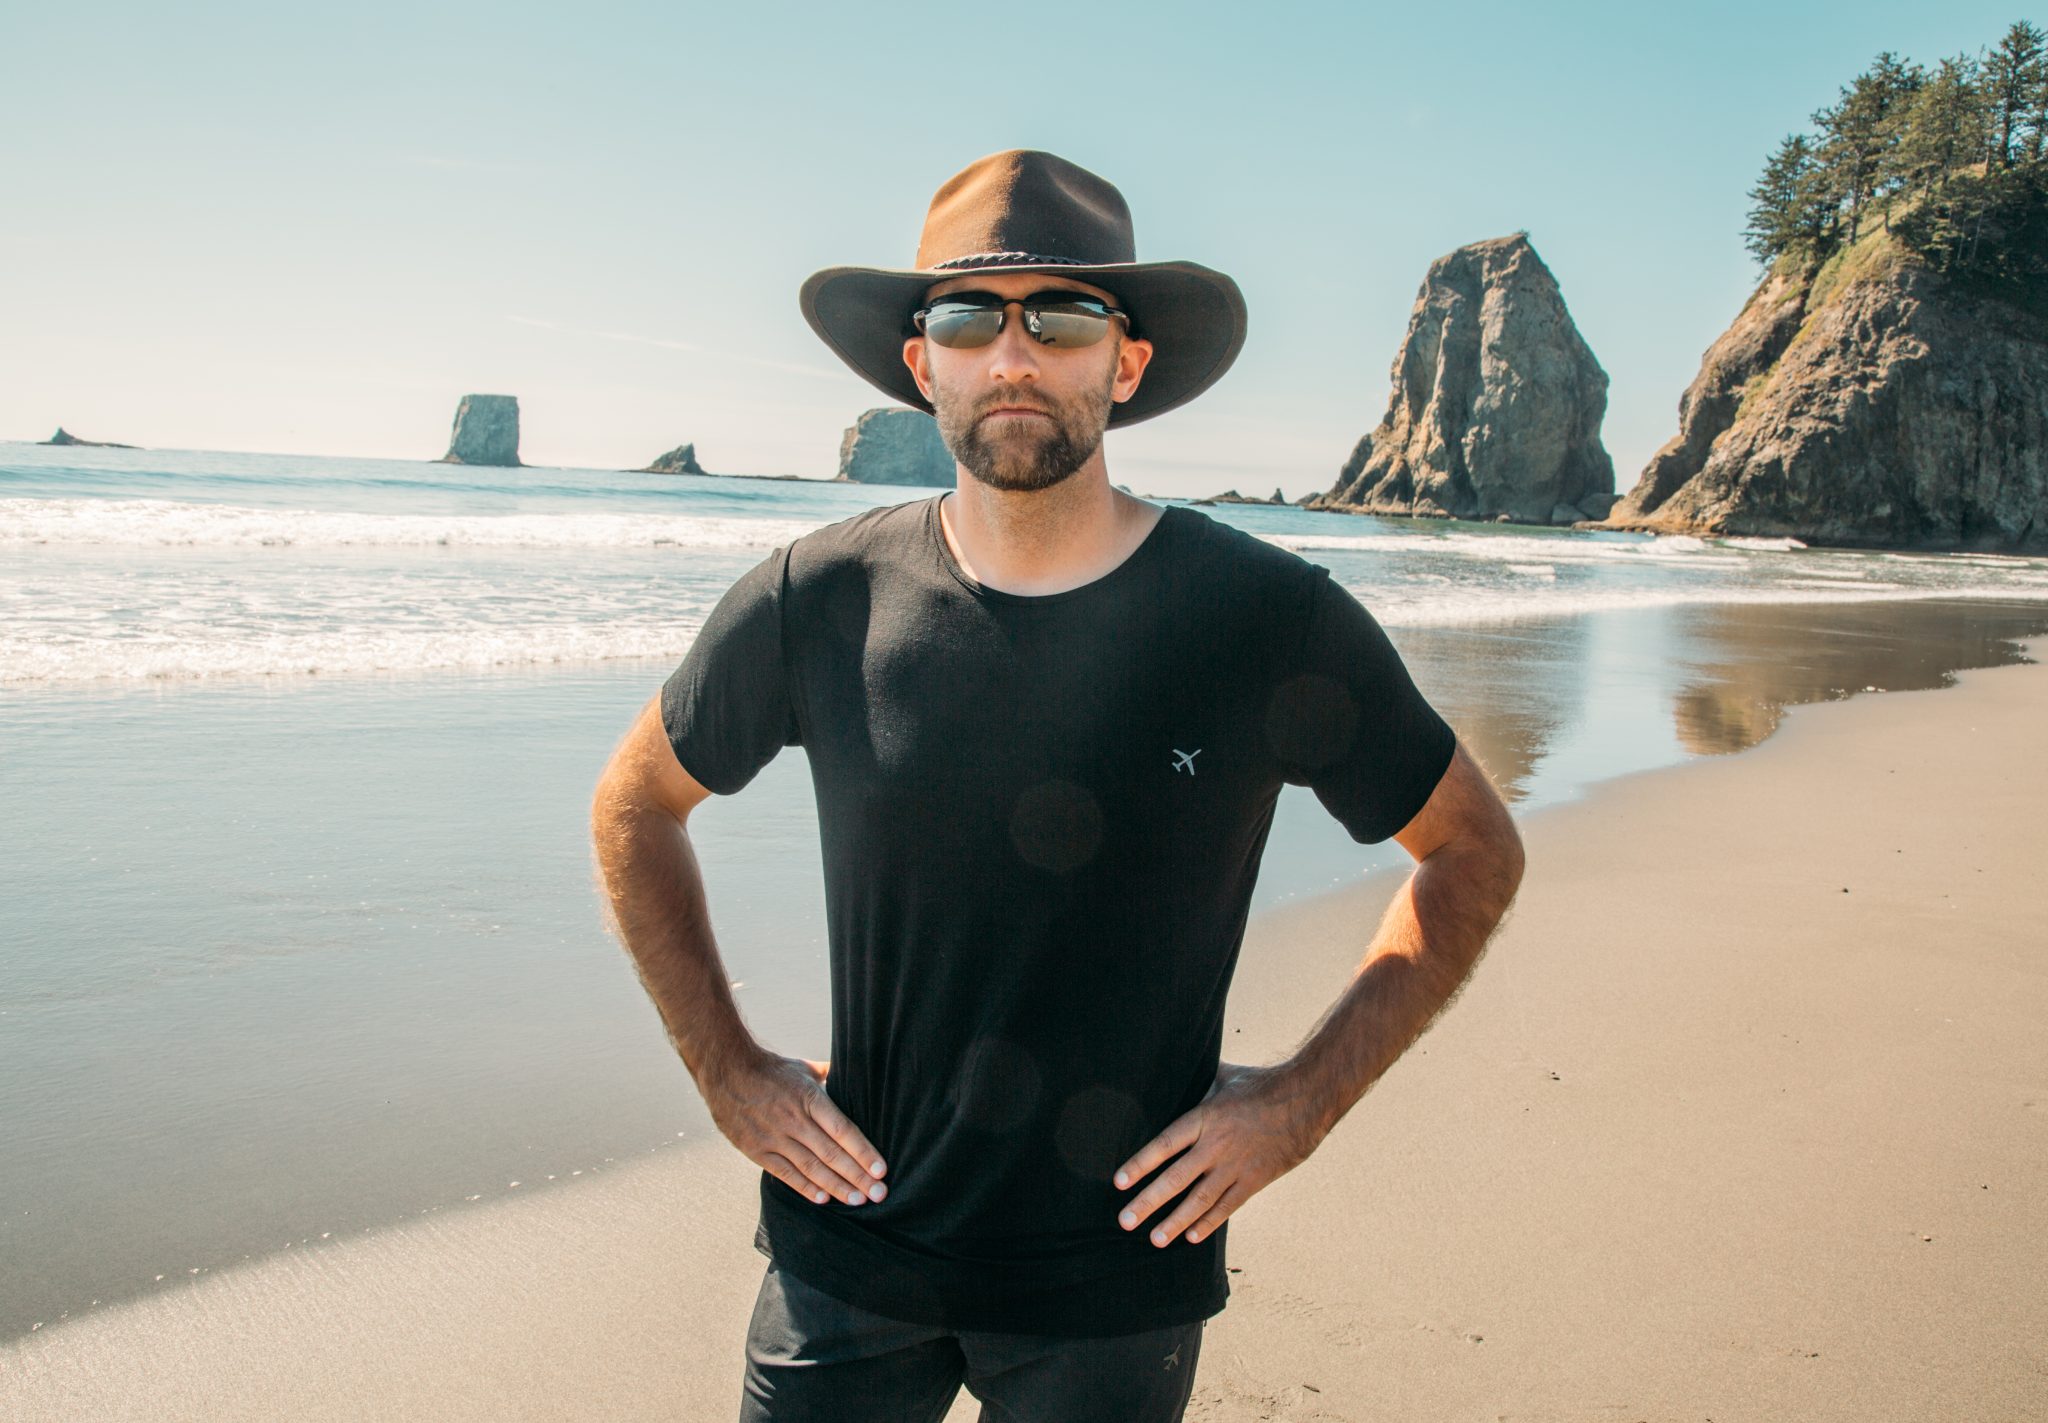 A man poses on a beachfront with his hands on his hips, looking at the camera. He's wearing a hat, sunglasses, and a black t-shirt.